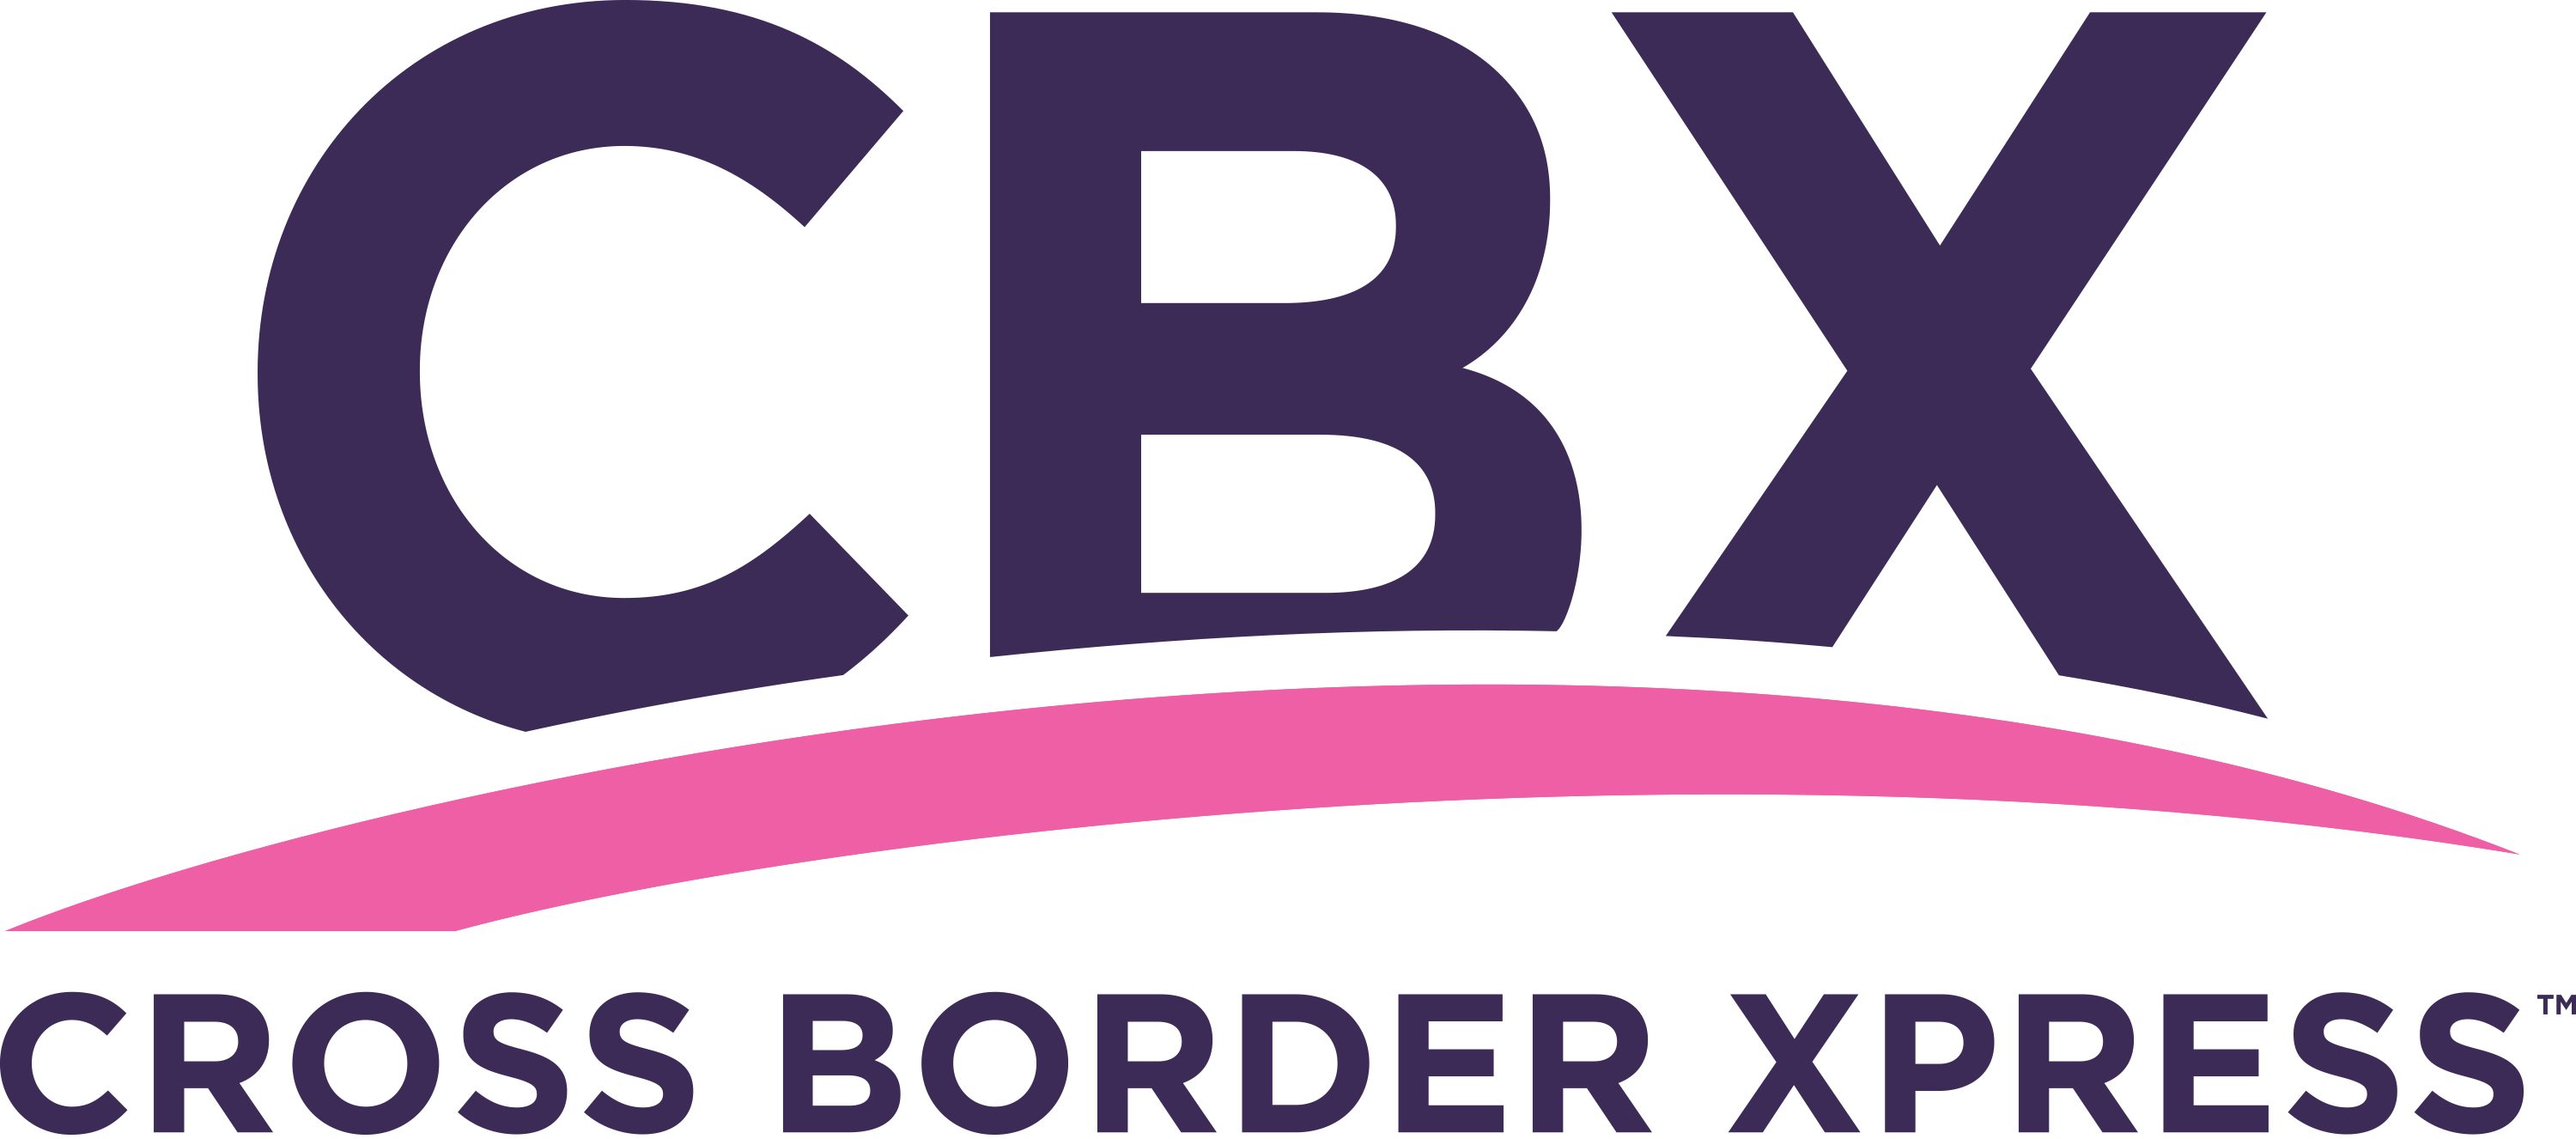 Buy your tickets, link your boarding pass and more CBX App